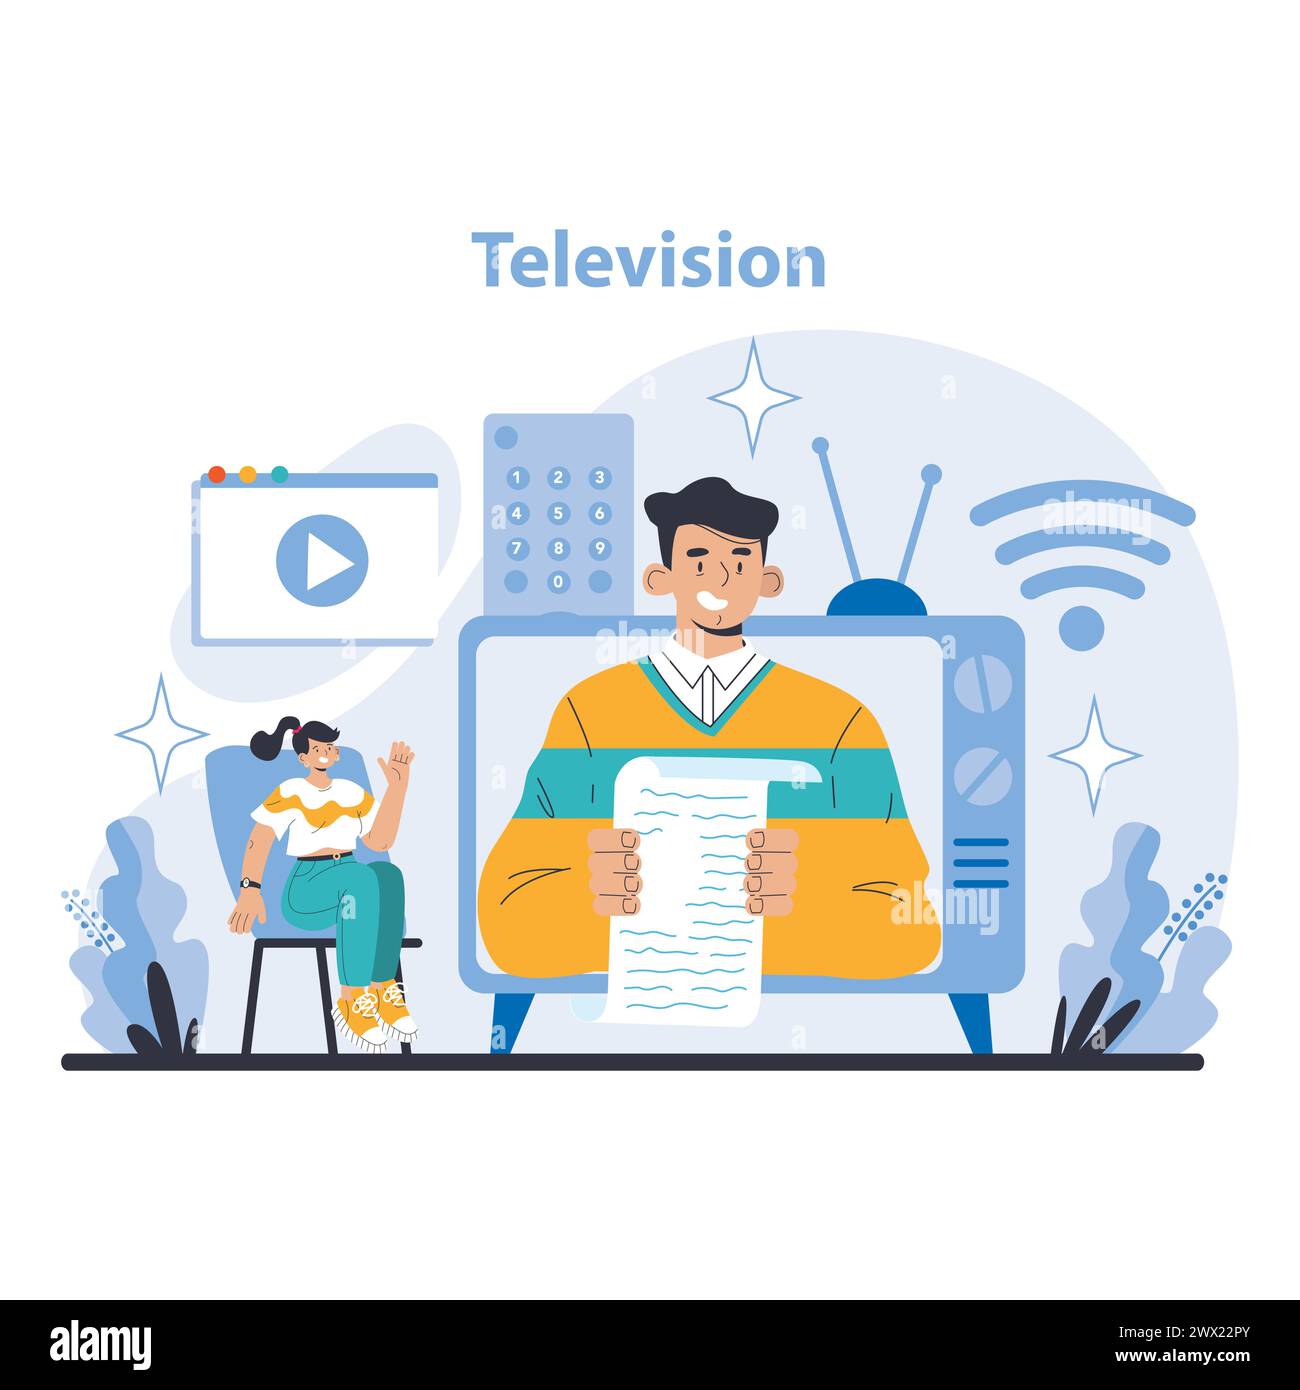 Television concept. Visual storytelling and news reporting. Anchors and audience engagement in media. Digital transition in TV. Flat vector illustration. Stock Vector